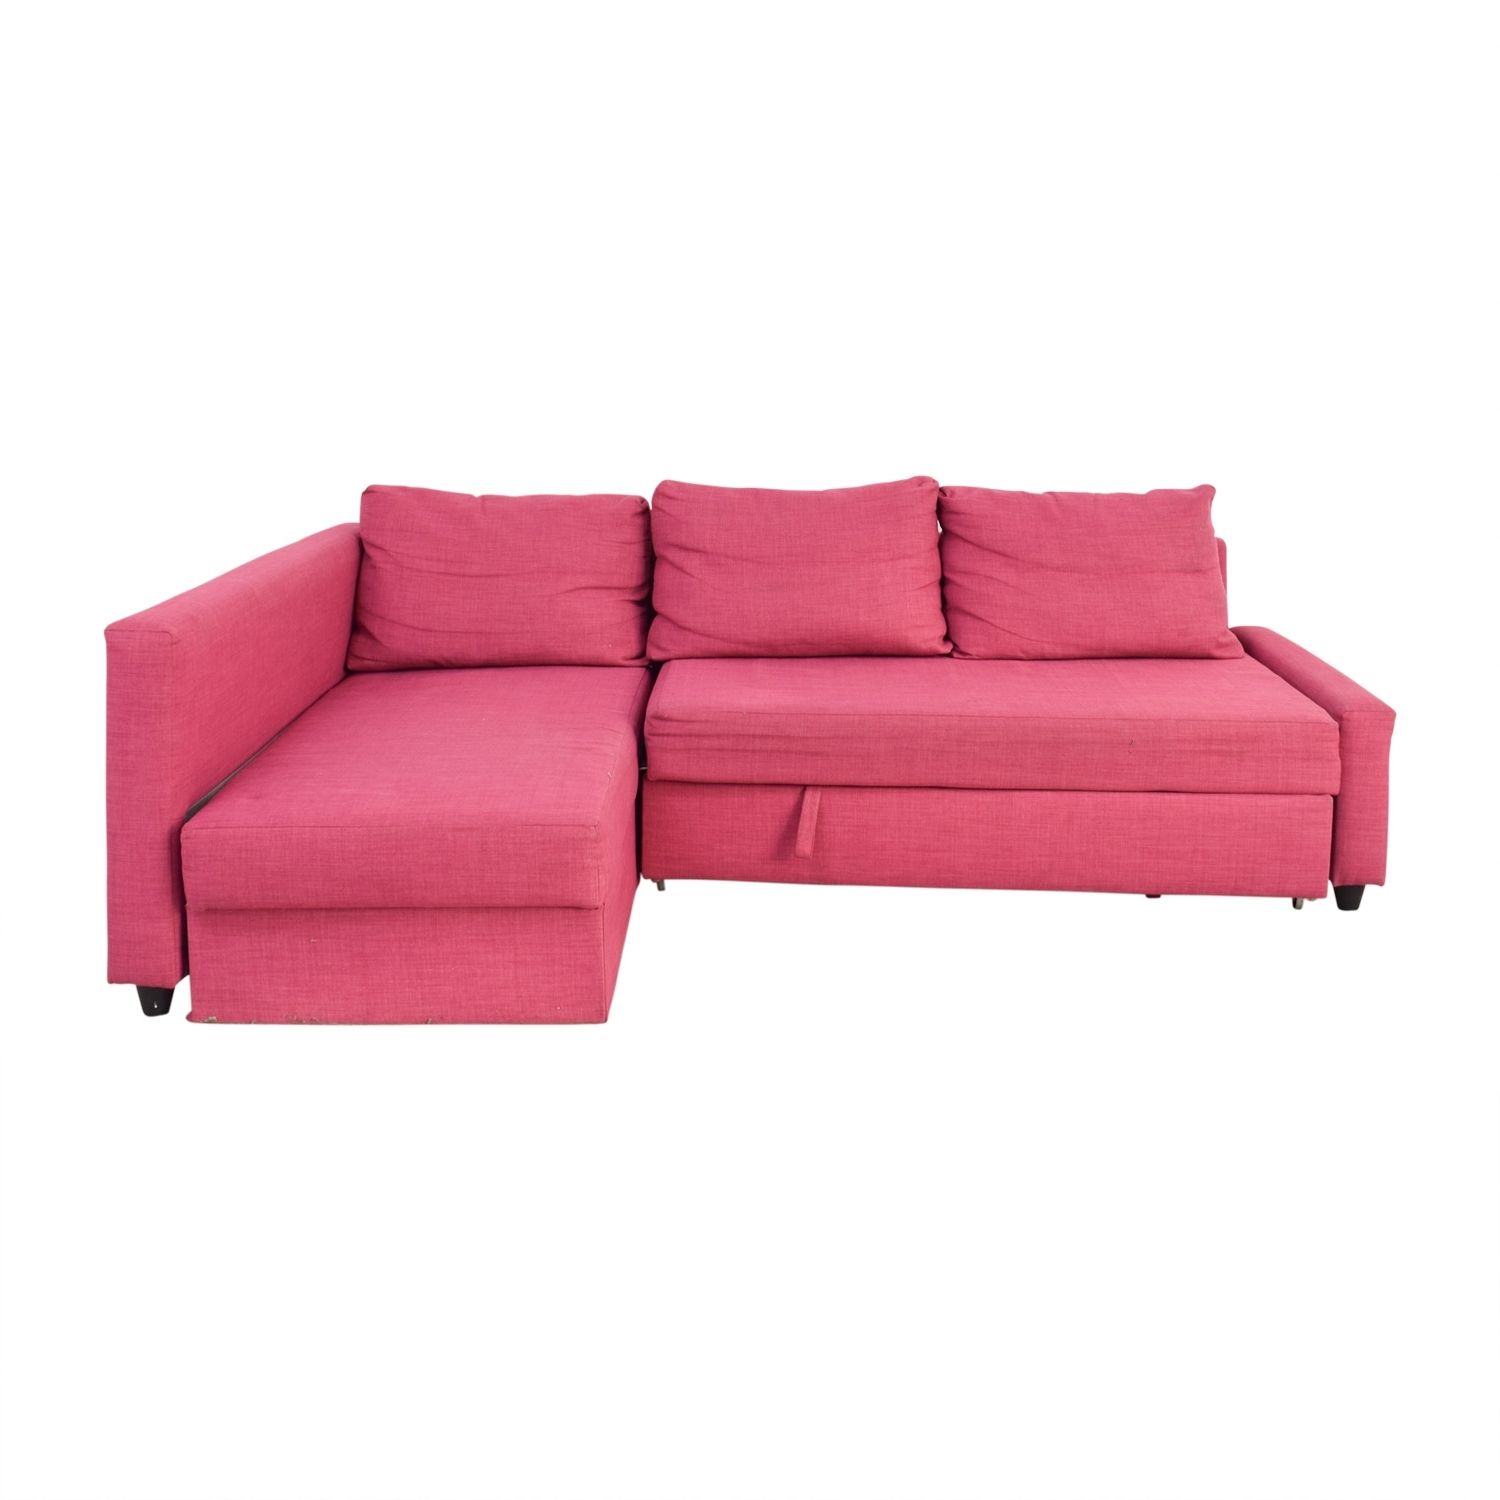 [%54% Off – Ikea Ikea Pink Kivik Chaise Sectional / Sofas Intended For Well Known Pink Chaises|pink Chaises Inside Favorite 54% Off – Ikea Ikea Pink Kivik Chaise Sectional / Sofas|current Pink Chaises Intended For 54% Off – Ikea Ikea Pink Kivik Chaise Sectional / Sofas|popular 54% Off – Ikea Ikea Pink Kivik Chaise Sectional / Sofas With Pink Chaises%] (View 15 of 15)